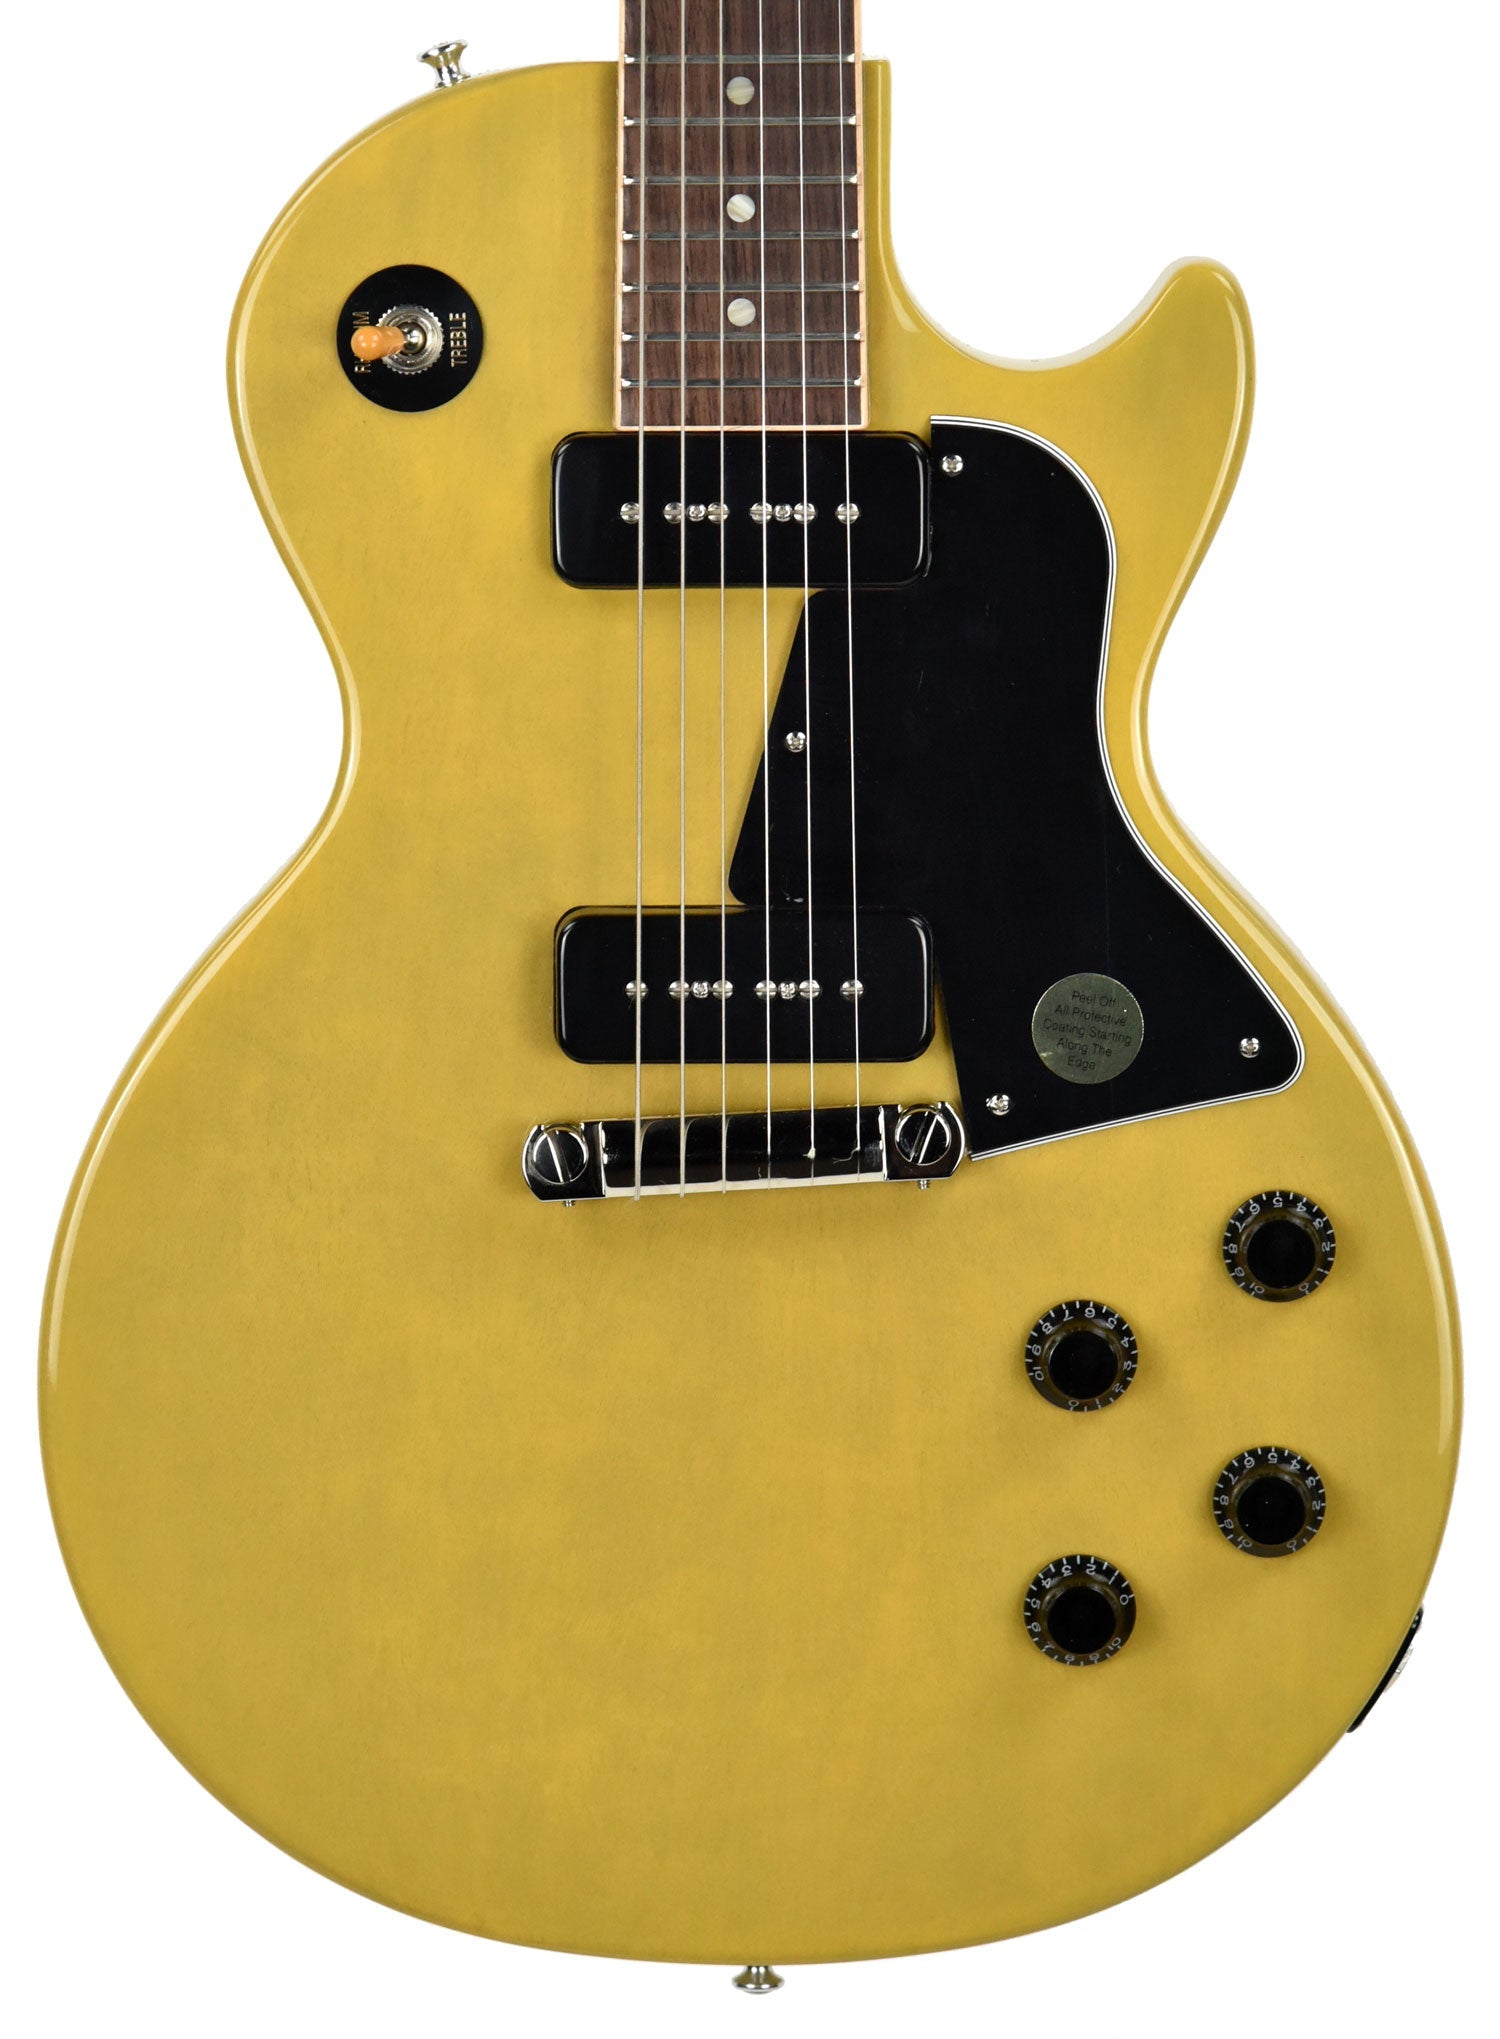 Used 2019 Gibson Les Paul Special in TV Yellow 110290202 | The